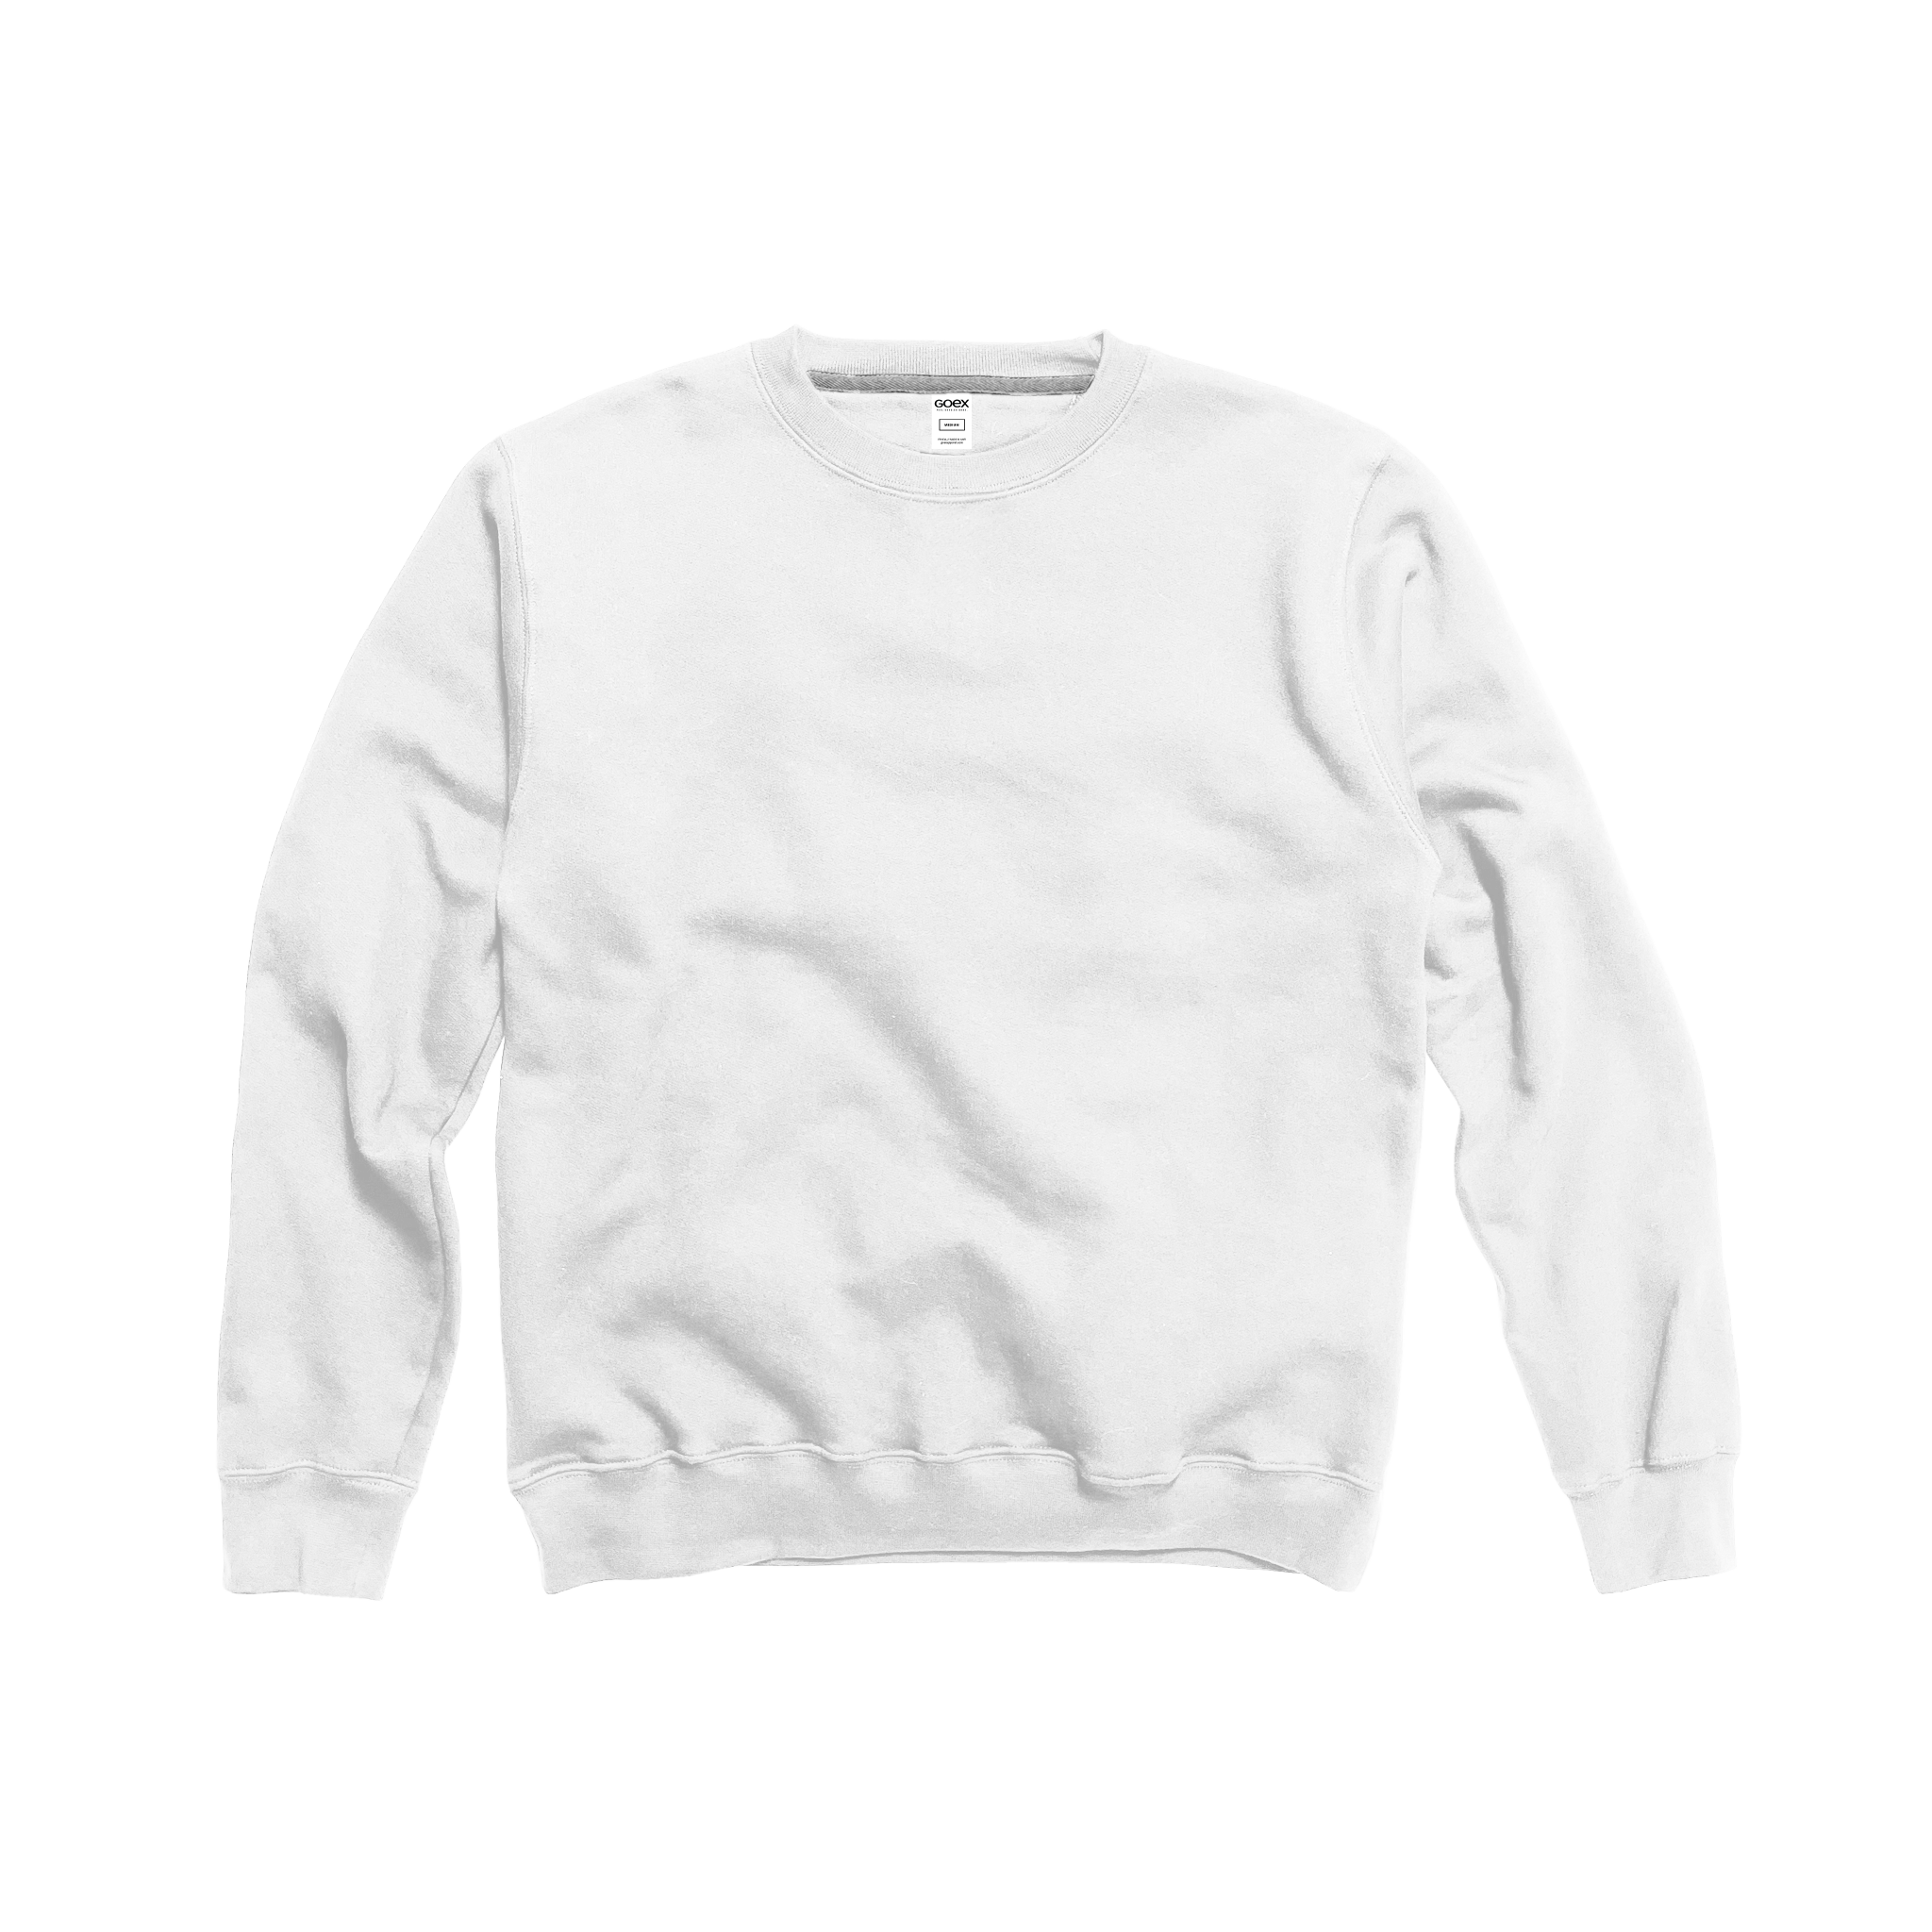 Front Flat Lay of GOEX Unisex and Men's Fleece Crew in White